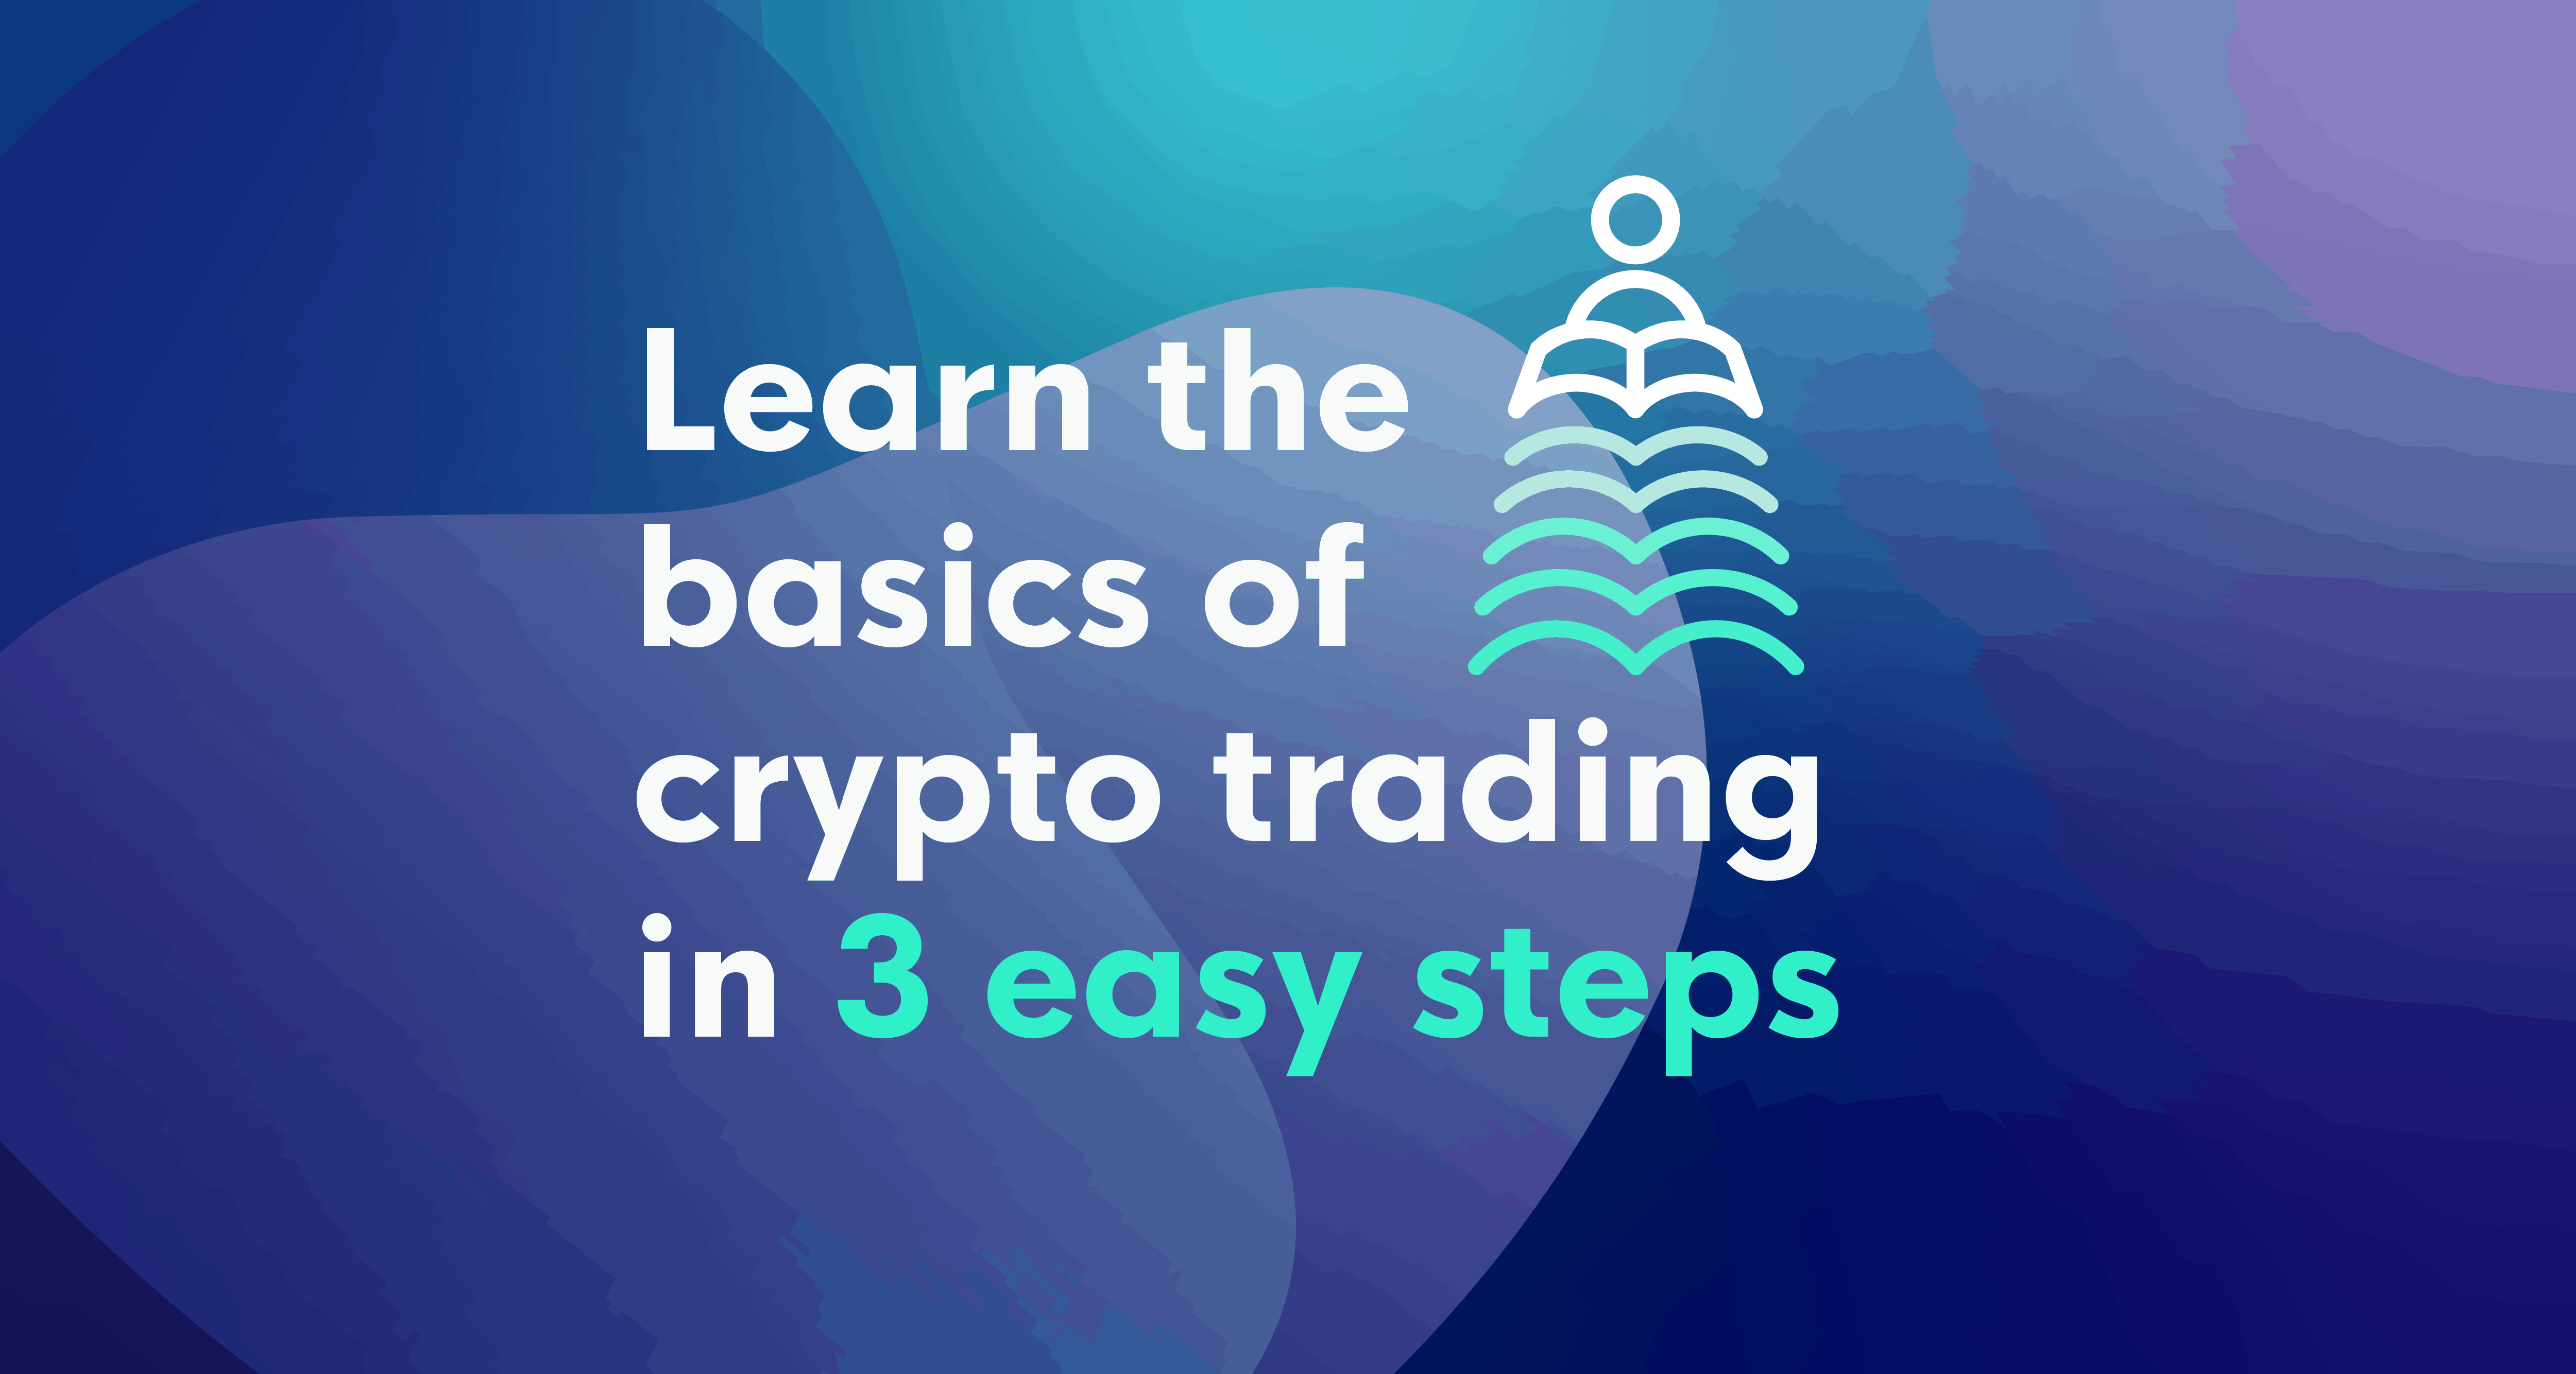 Learn the basics of crypto trading in 3 easy steps